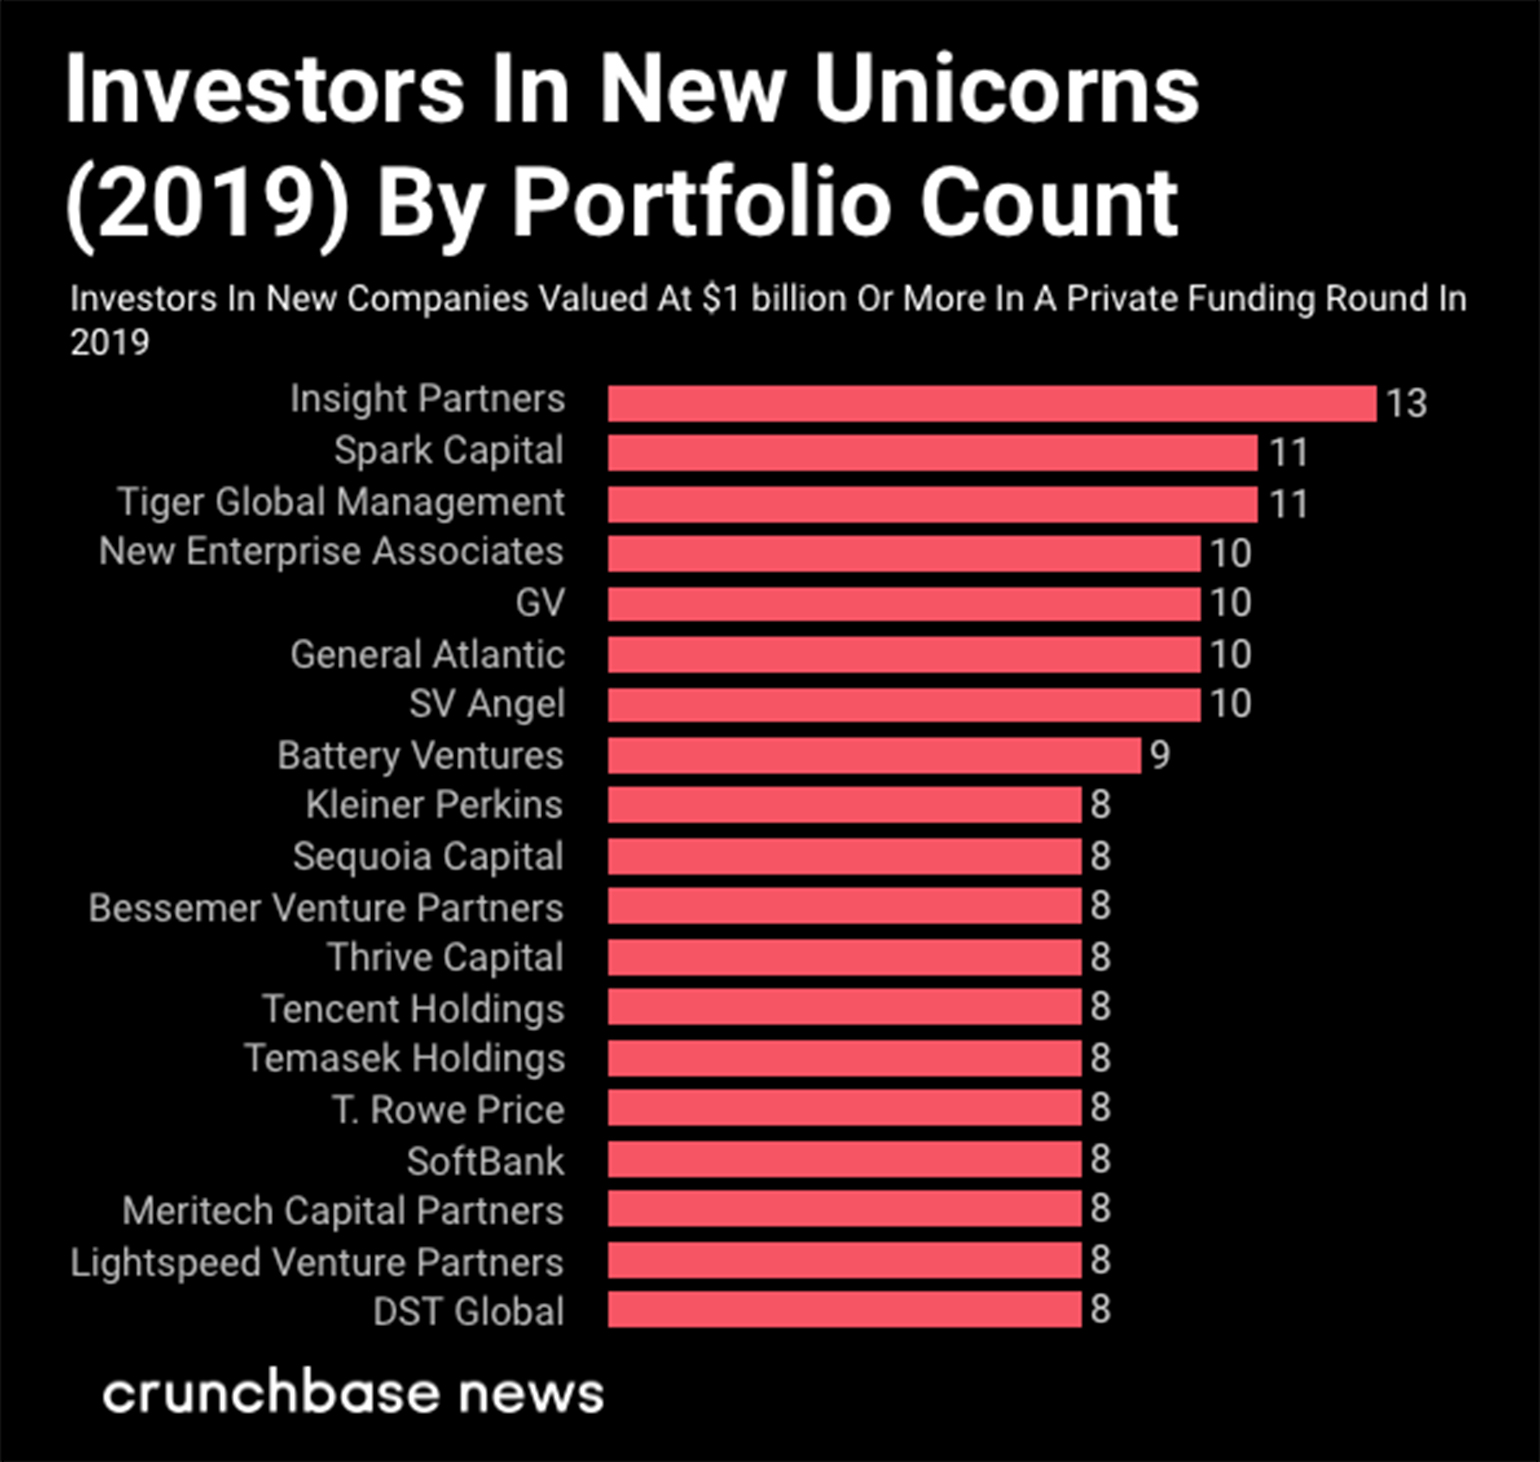 The Growth Of New Unicorns In 2019 Is Higher Than Previous Years-Body Image 19